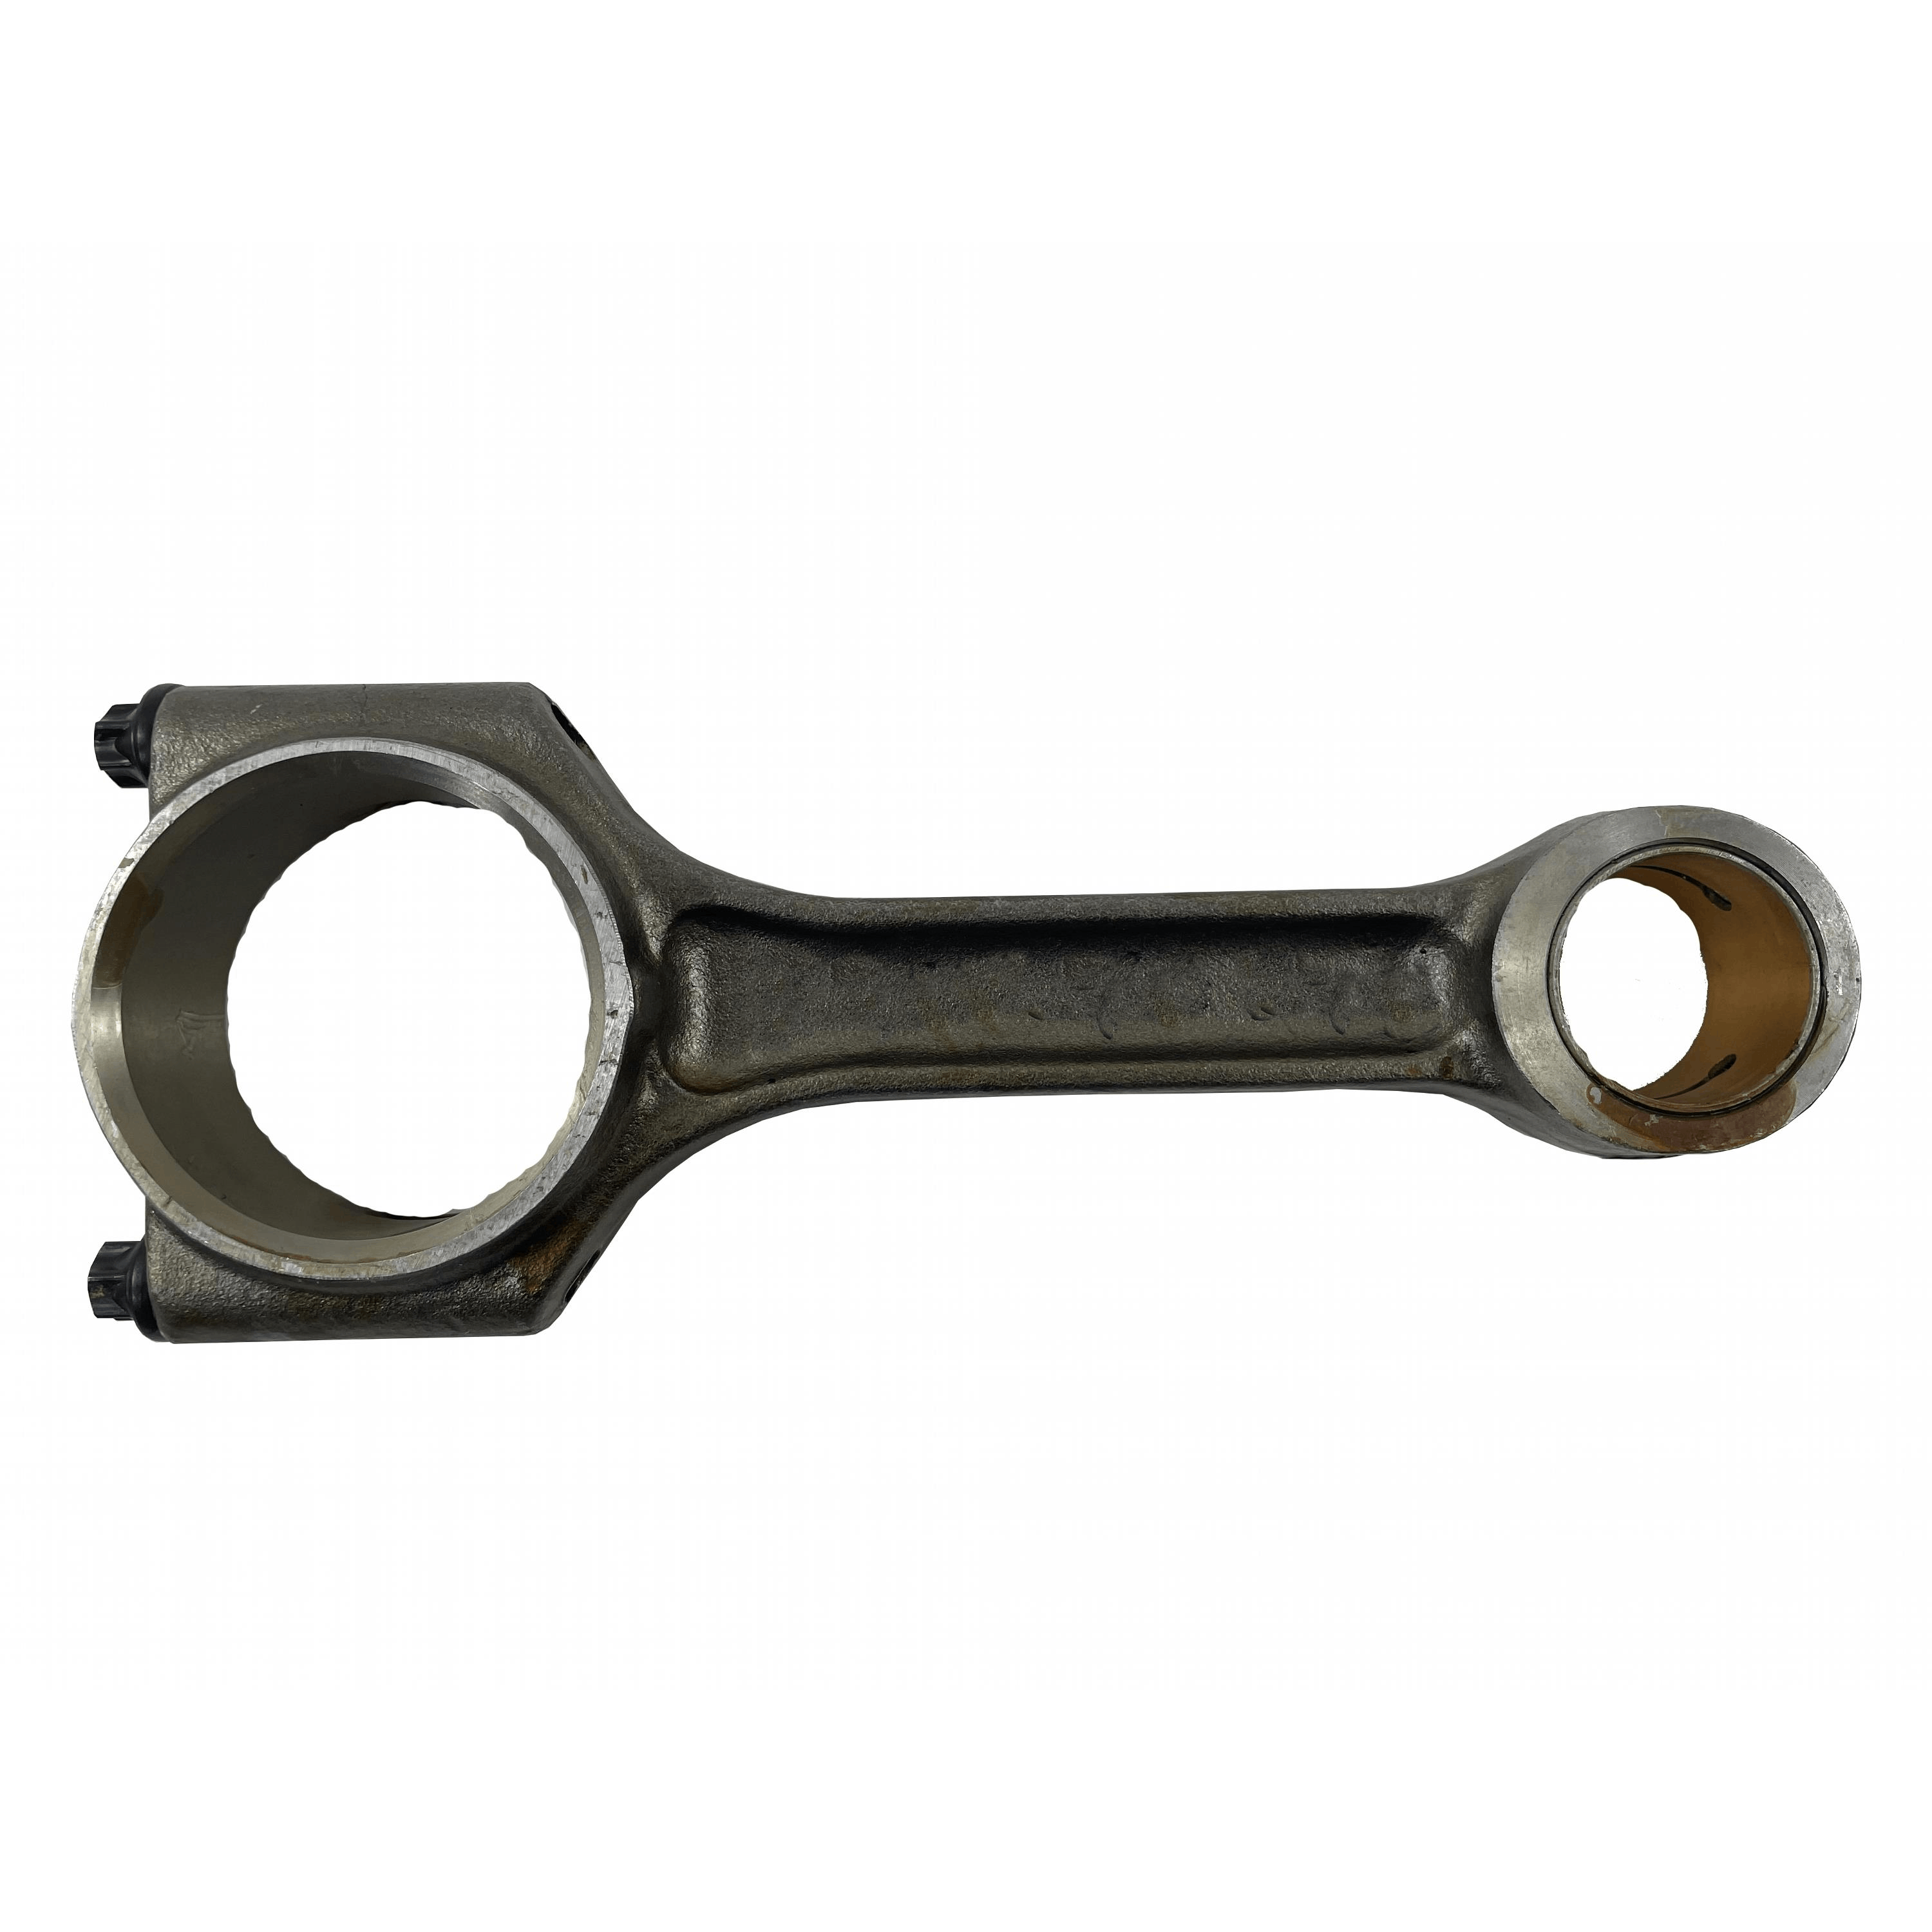 Connecting Rod – HCB201-9885